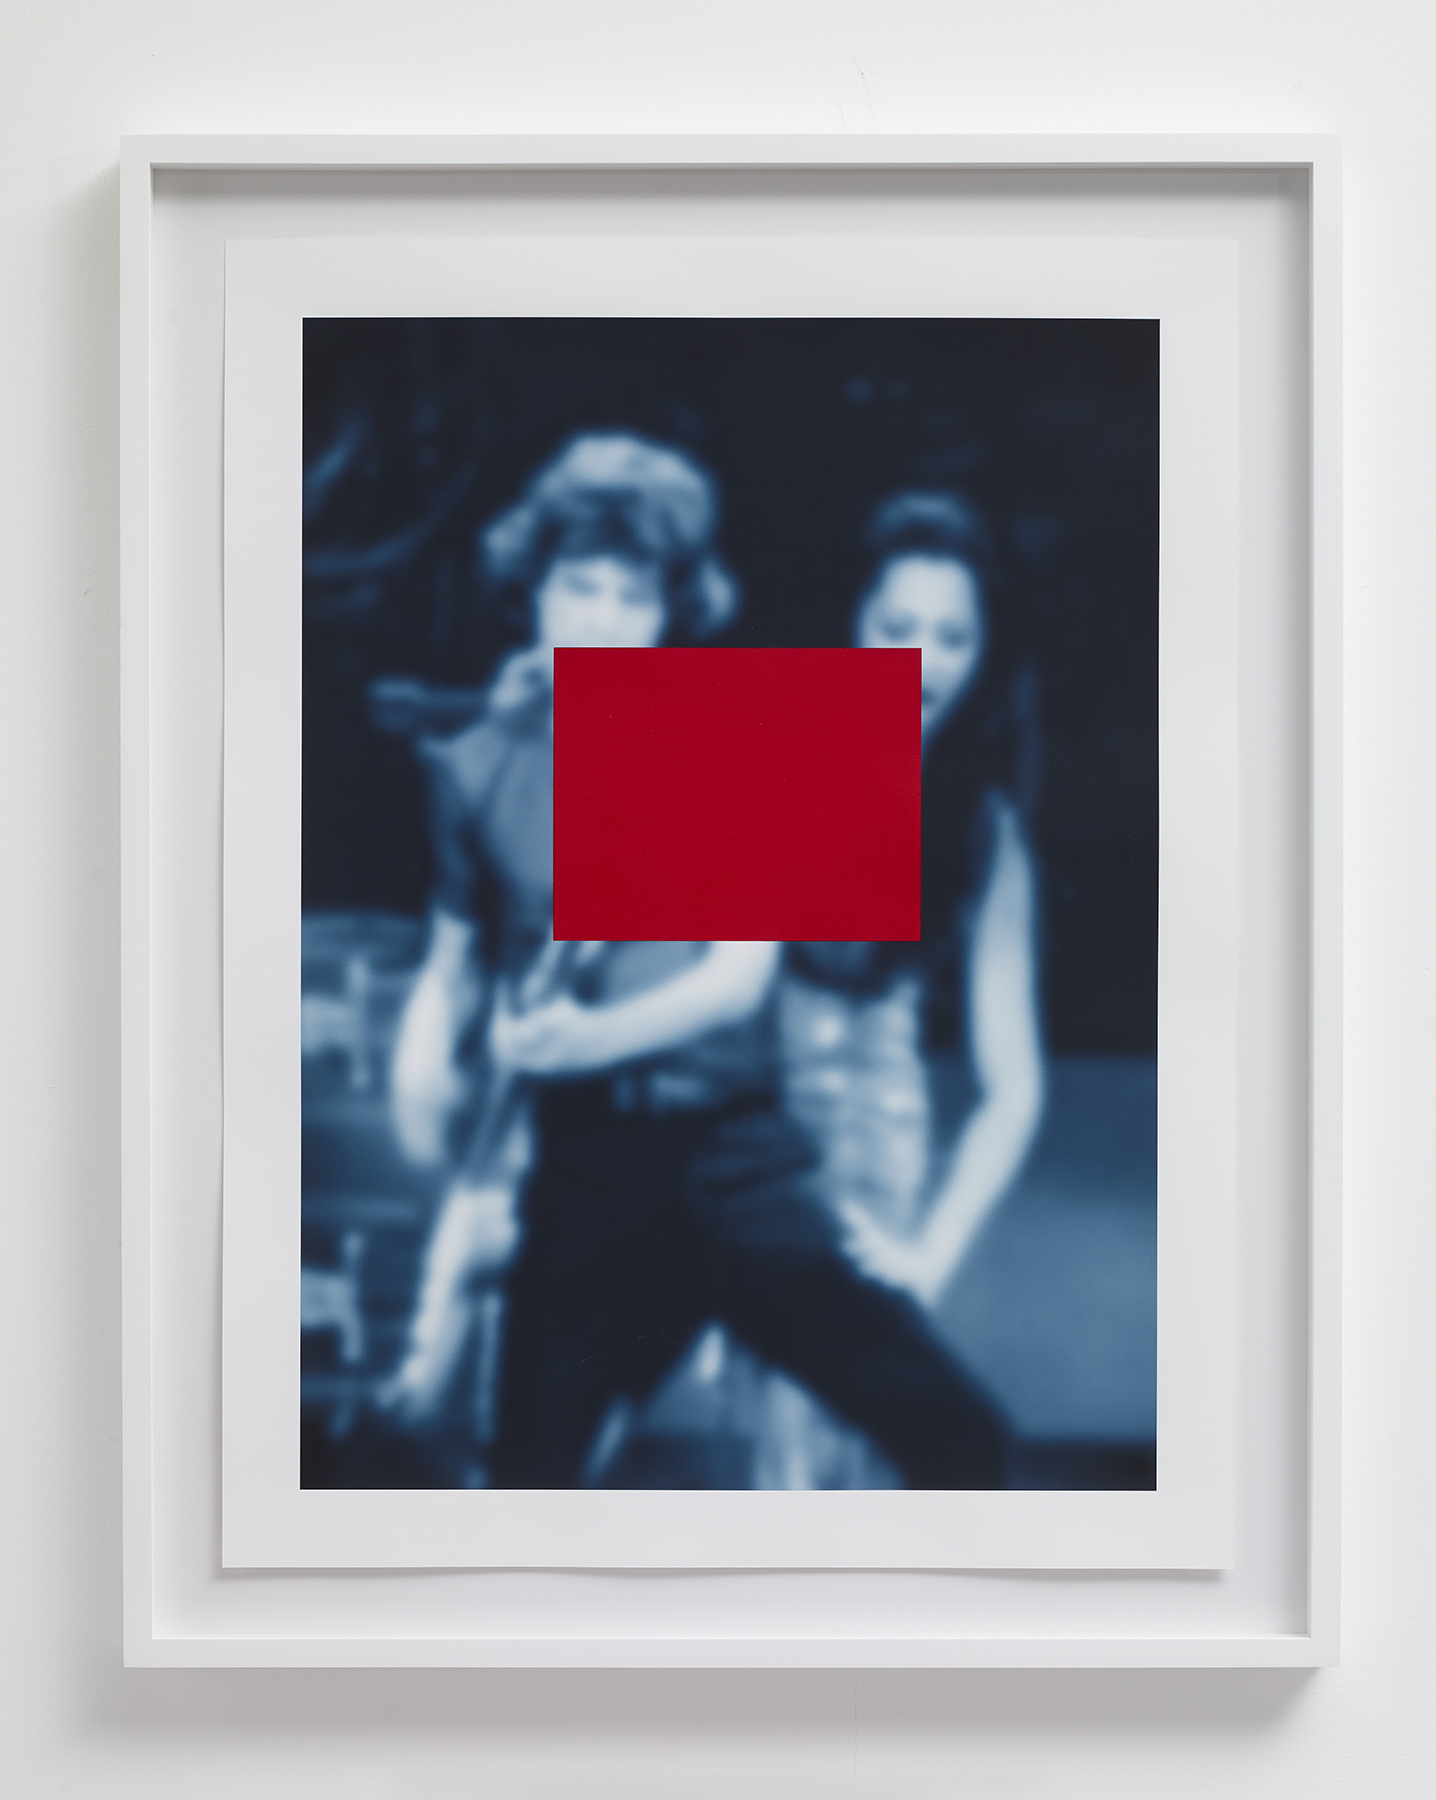 Image of Carrie Mae Weems' work Blue Notes Mick and Lisa Fischer, 2014